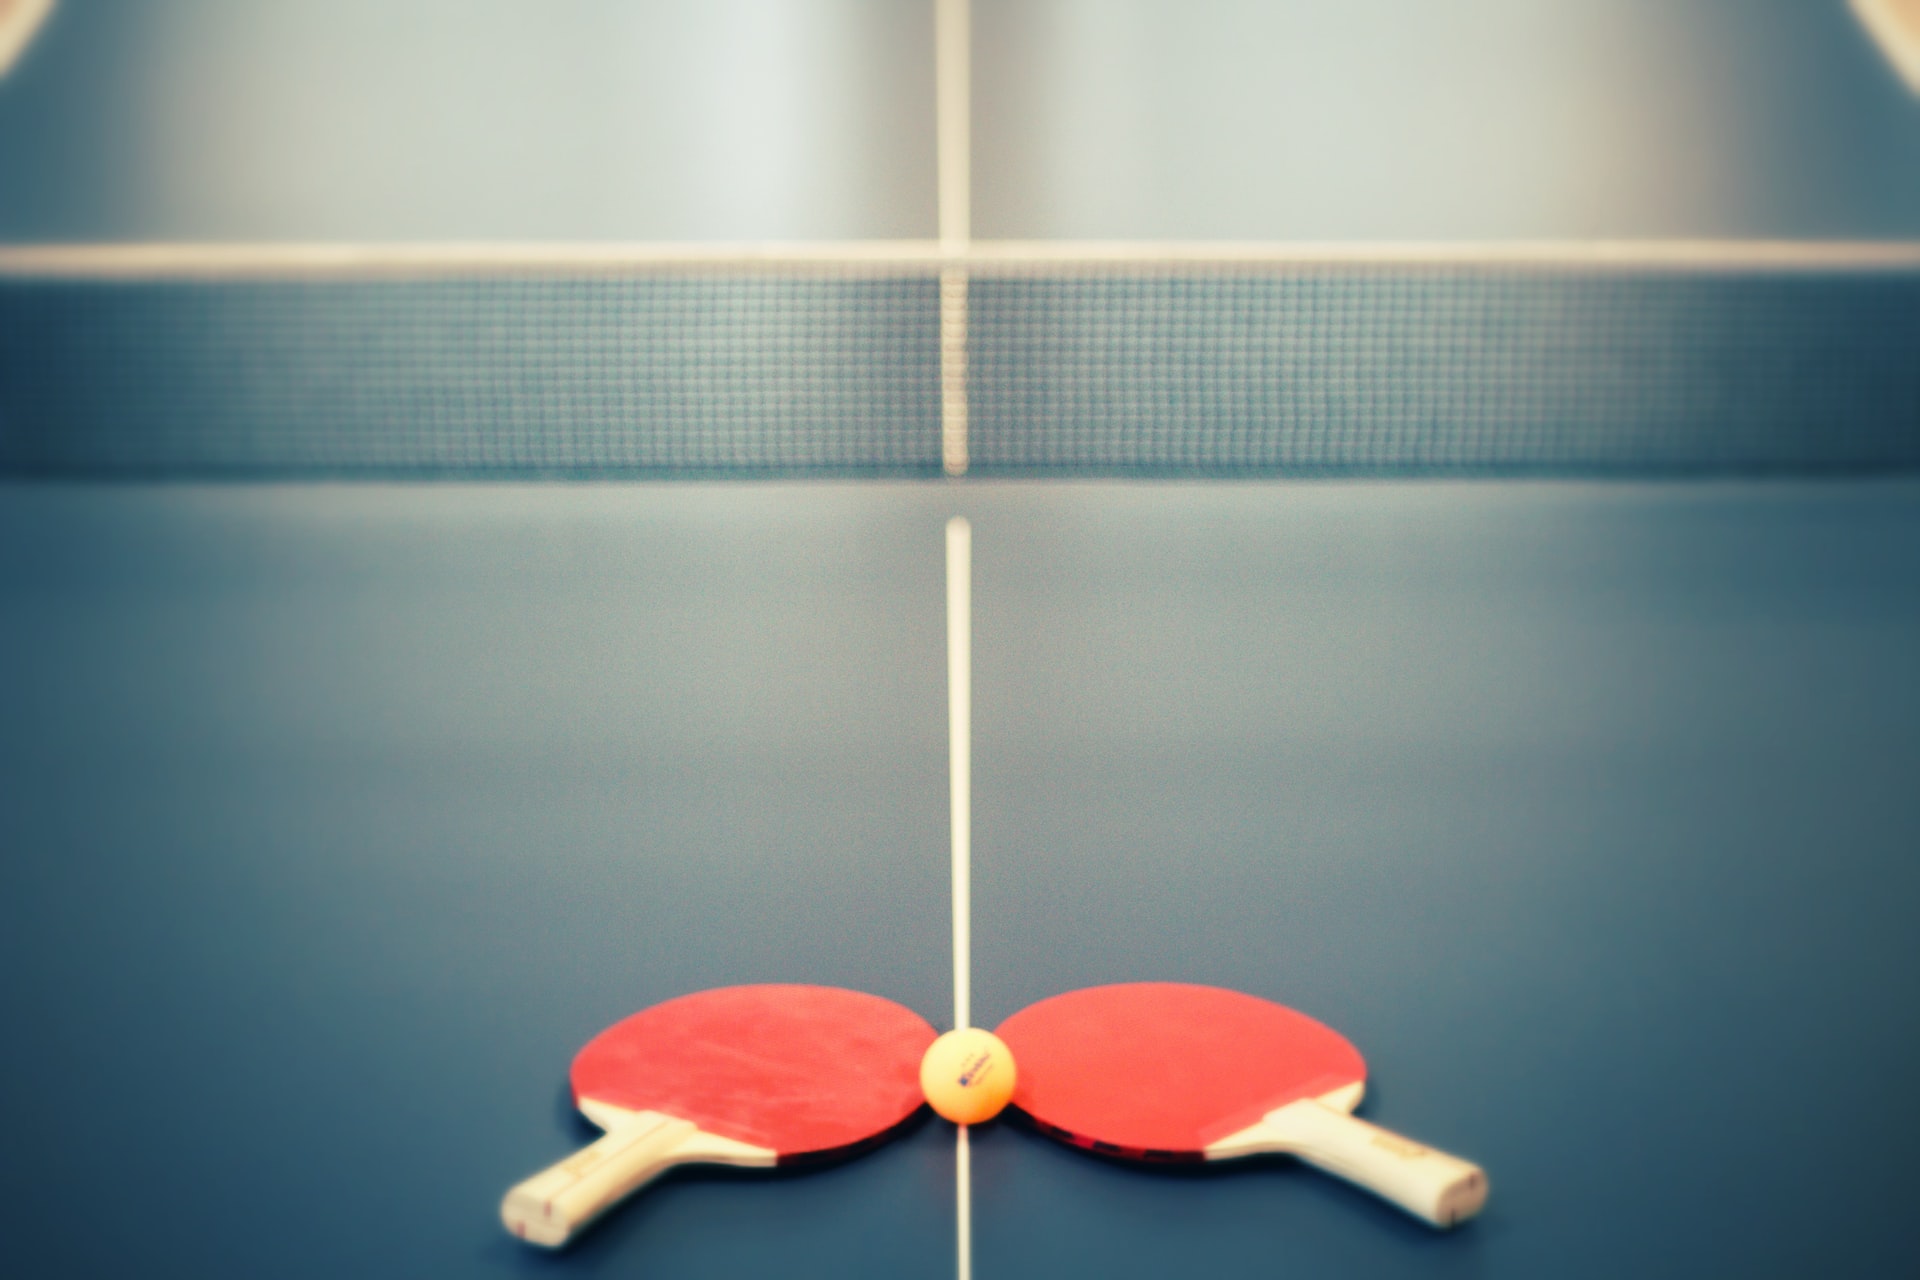 Ping-pong – What is it and is it similar to badminton?